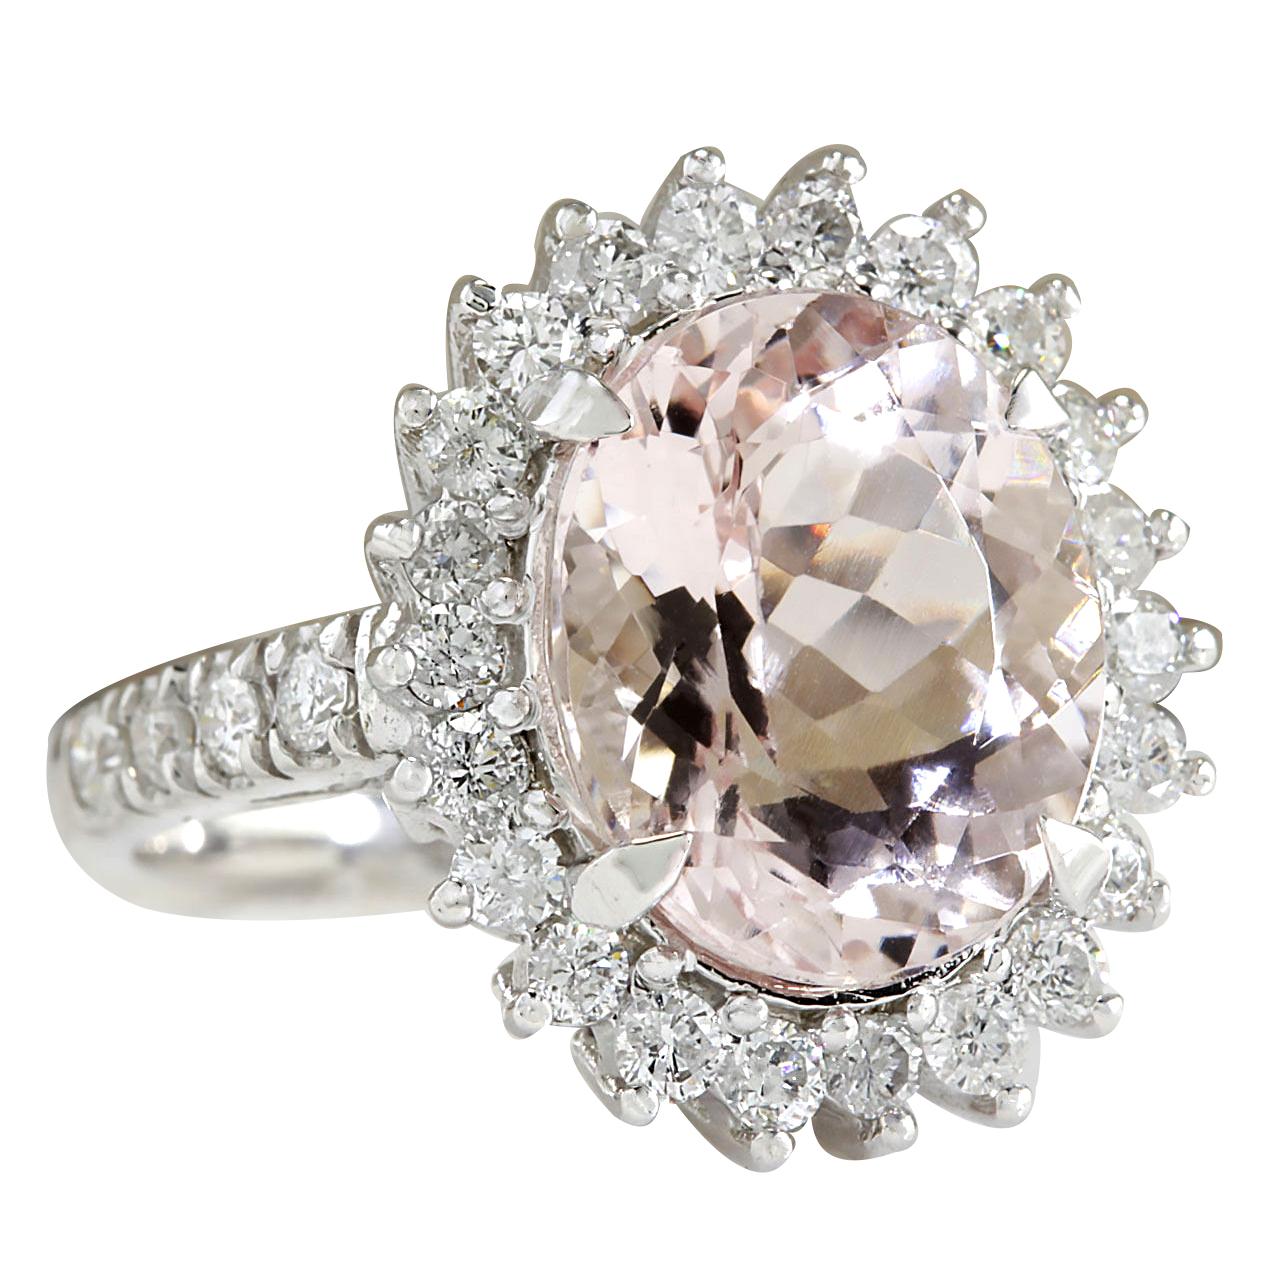 Stamped: 14K White Gold
Total Ring Weight: 6.9 Grams
Morganite Weight is 6.14 Carat (Measures: 14.00x10.00 mm)
Diamond Weight is 1.20 Carat
Color: F-G, Clarity: VS2-SI1
Face Measures: 19.45x17.00 mm
Sku: [702505W]